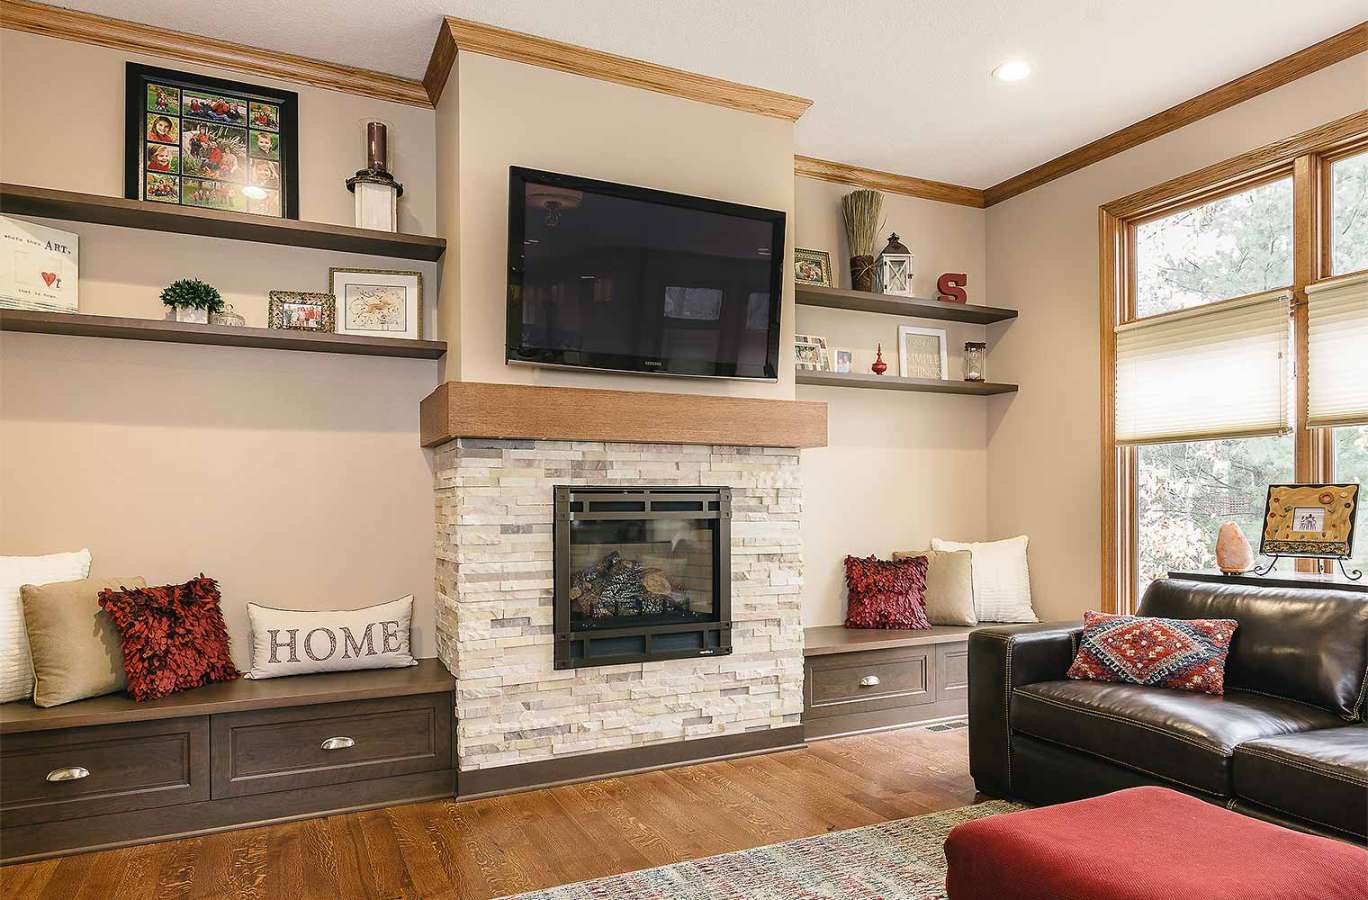 Family Room Remodel Gets New Stone Fireplace and Built-in Benches